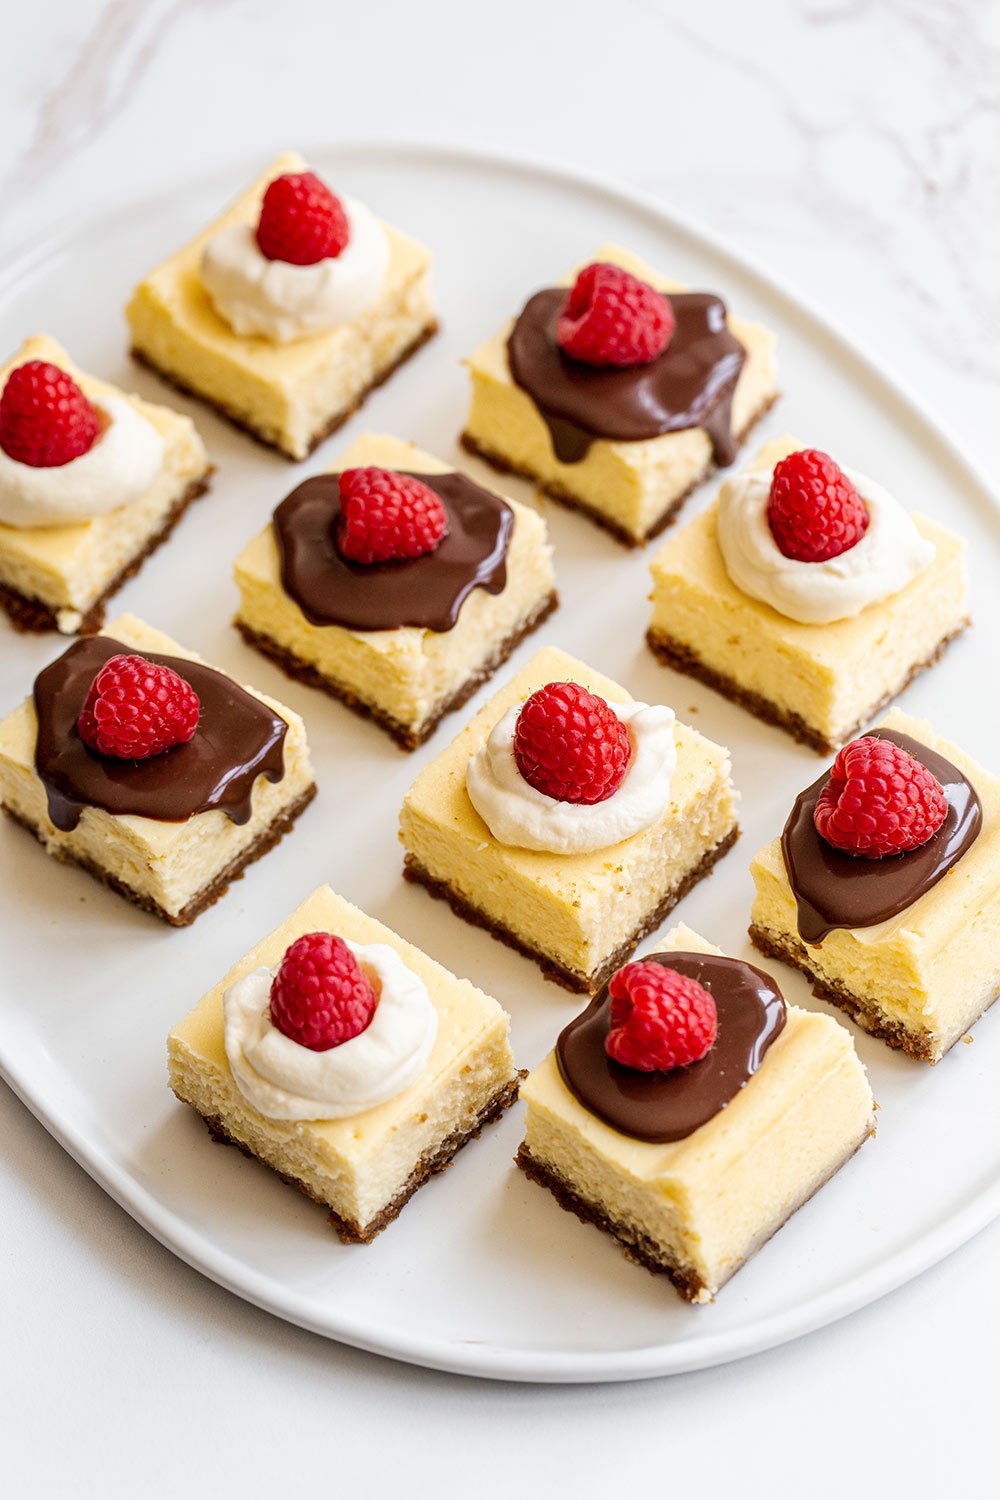 cheesecake squares topped with chocolate ganache or whipped cream and a fresh raspberry, ready to serve